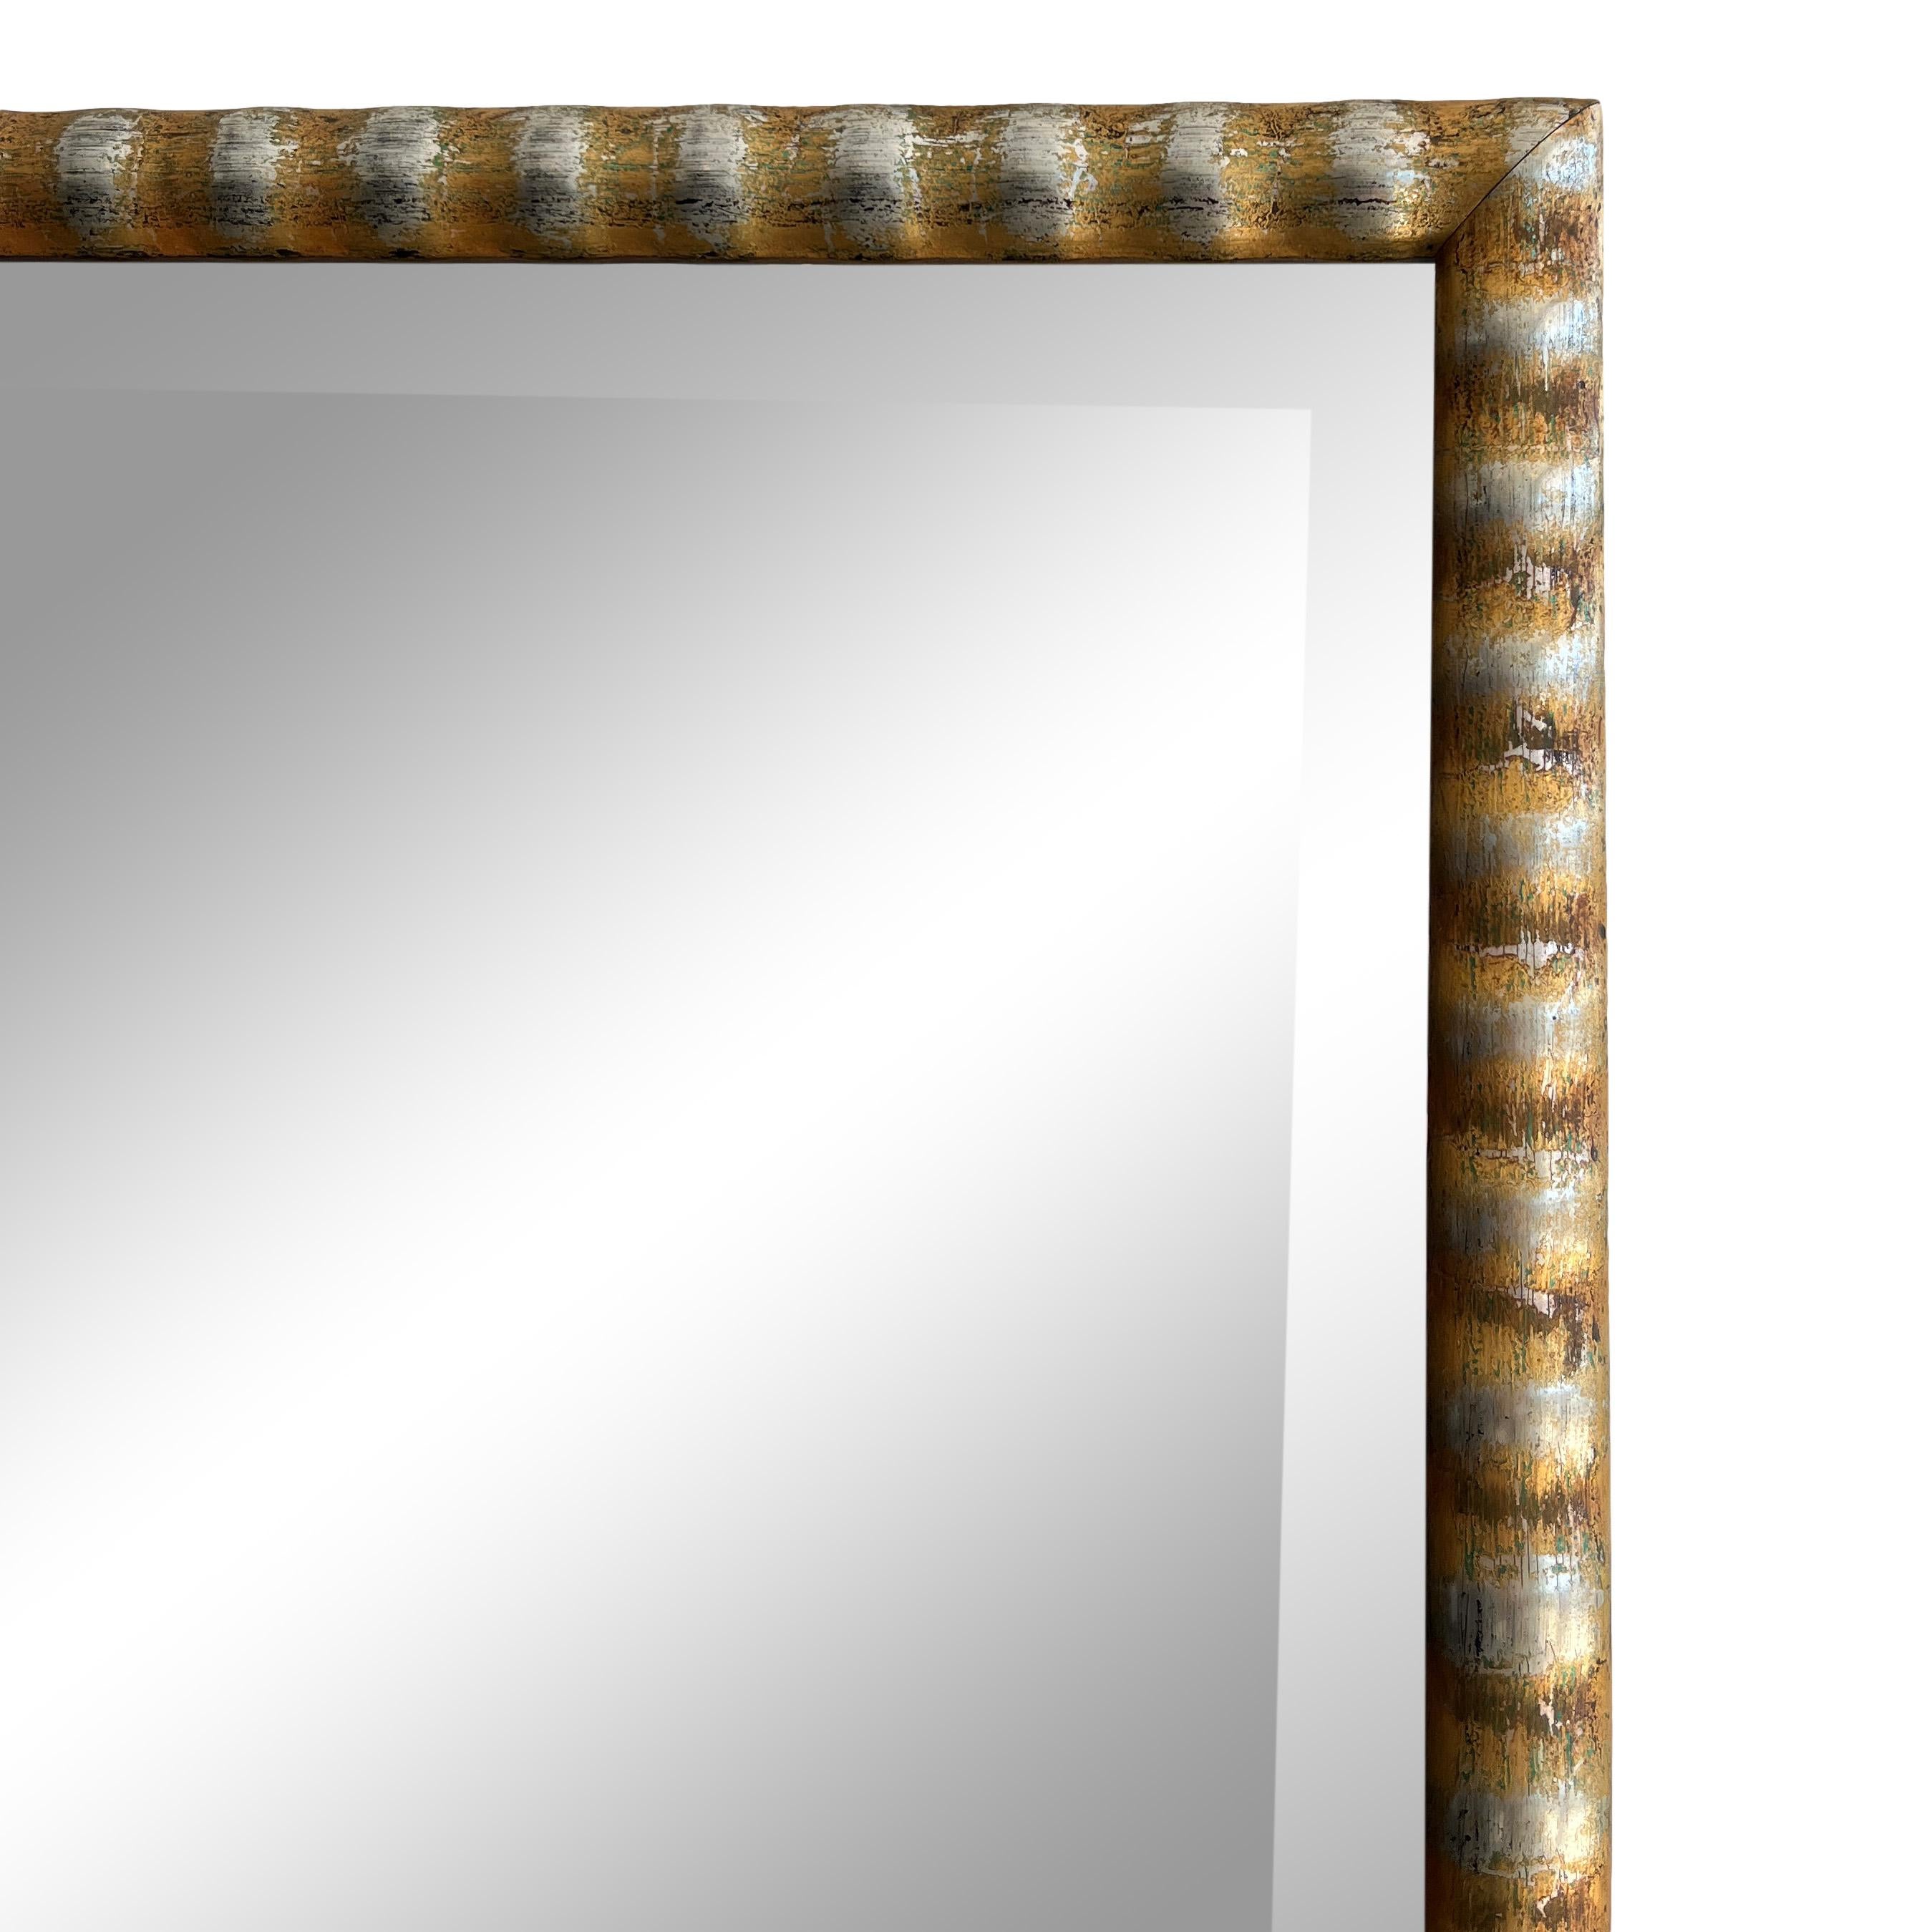 This elegant antique mirror will bring a sense of style and sophistication to your home. Crafted with a large beveled gilt frame and vintage mirror, it's sure to make any room feel more luxe and refined.

See in person at our Los Angeles location.